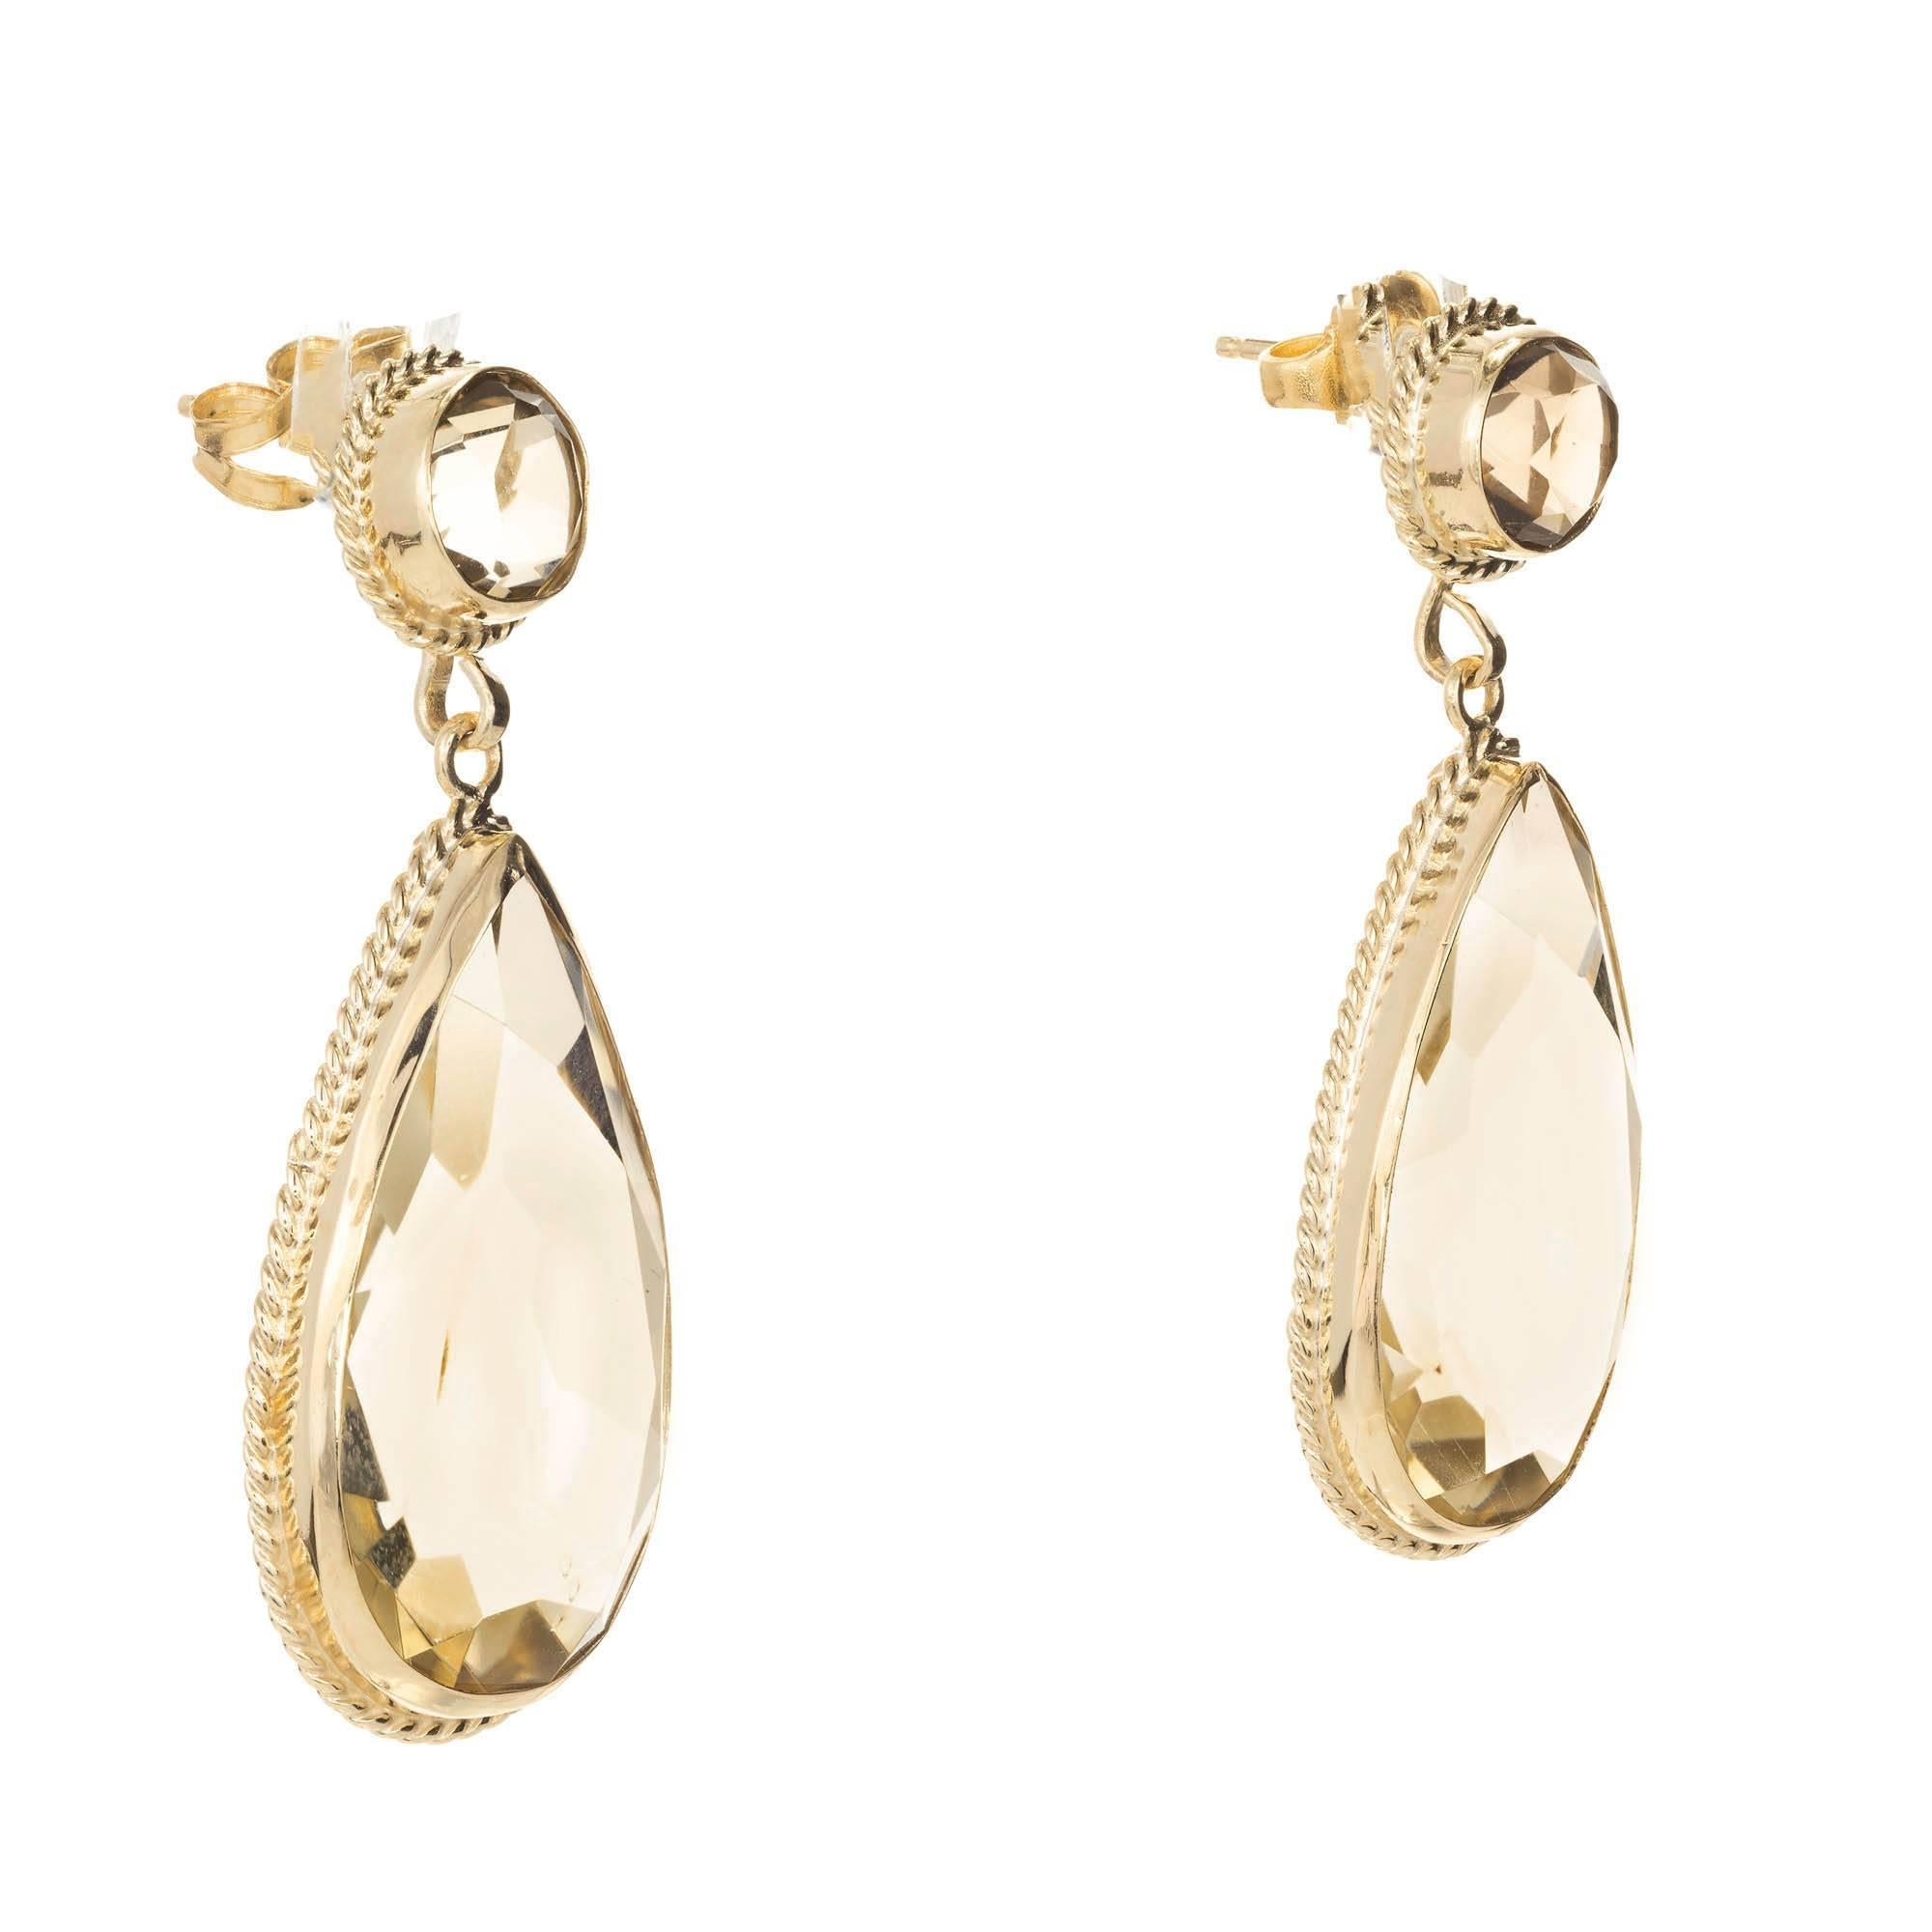 1950s 14k yellow gold smoky Quartz dangle earrings.

2 round grayish brown smoky Quartz, approx. total weight 2.00cts, VS
2 grayish brown pear shaped smoky Quartz, approx. total weight 16.00ct, VS
14k Yellow Gold
10.0 grams
Tested and stamped: